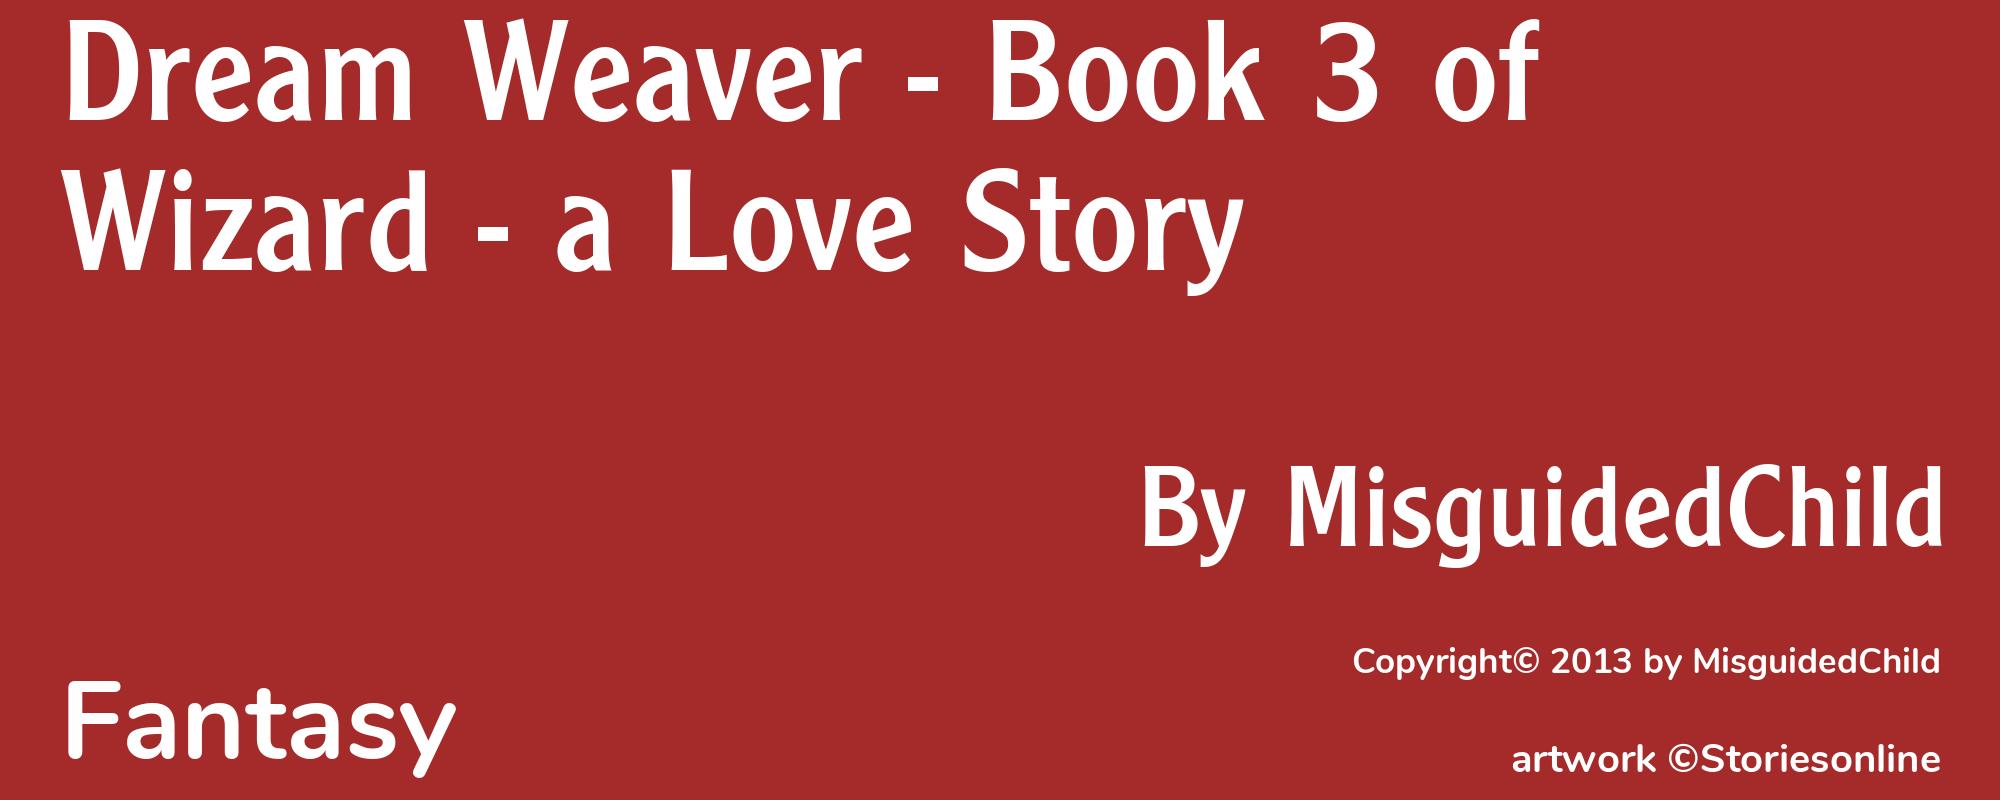 Dream Weaver - Book 3 of Wizard - a Love Story - Cover